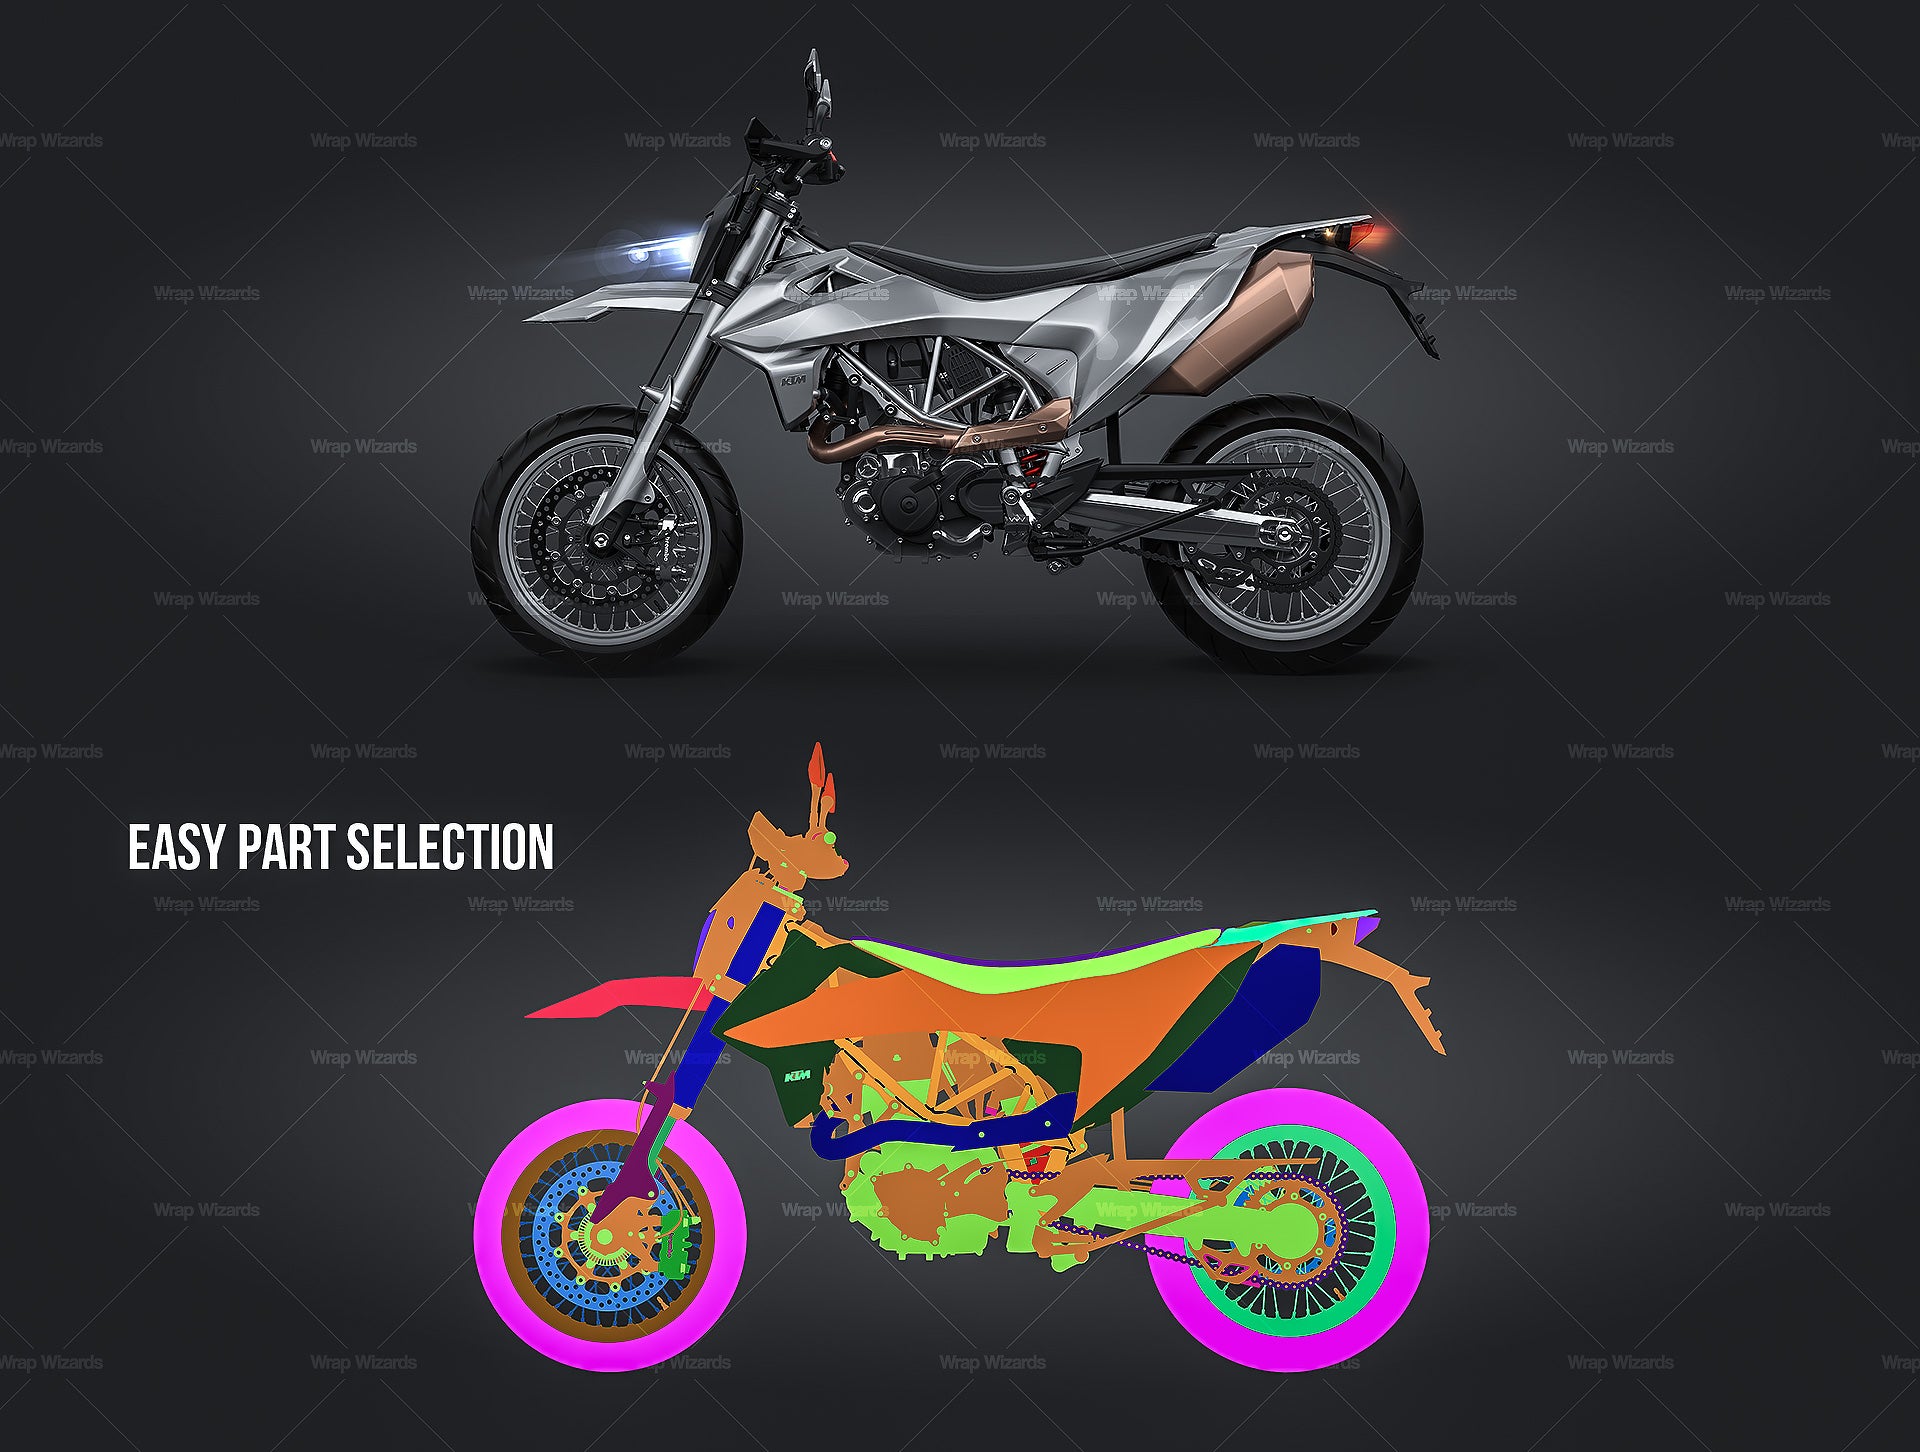 KTM 690 SMC-R 2020 glossy finish - all sides Motorcycle Mockup Template.psd